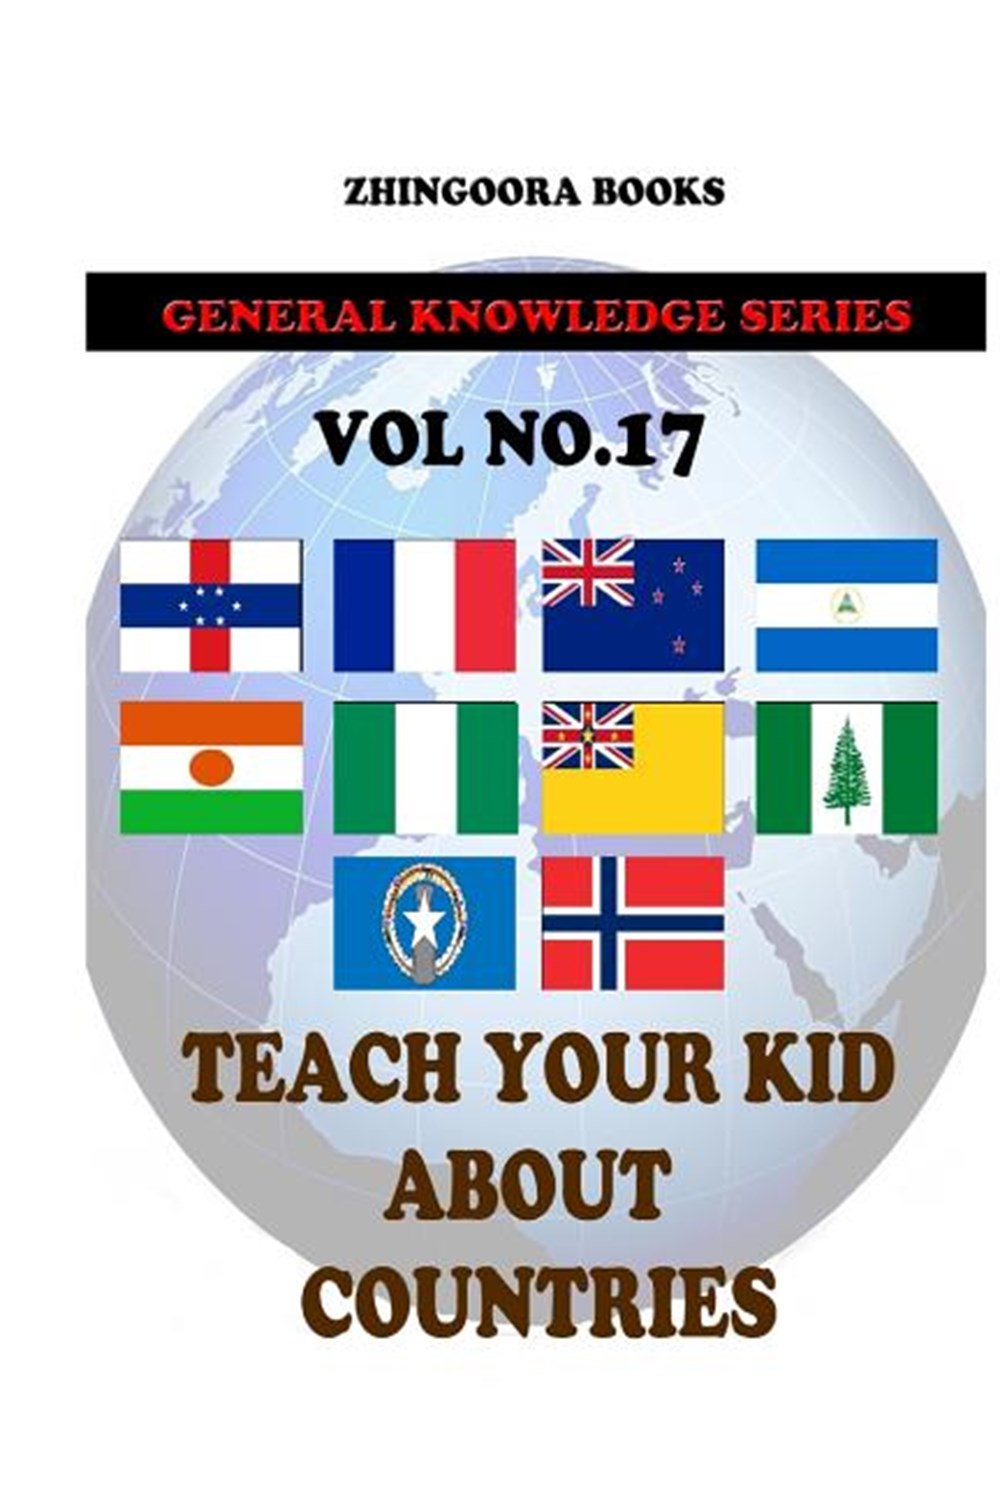 Teach Your Kids About Countries [Vol 17]